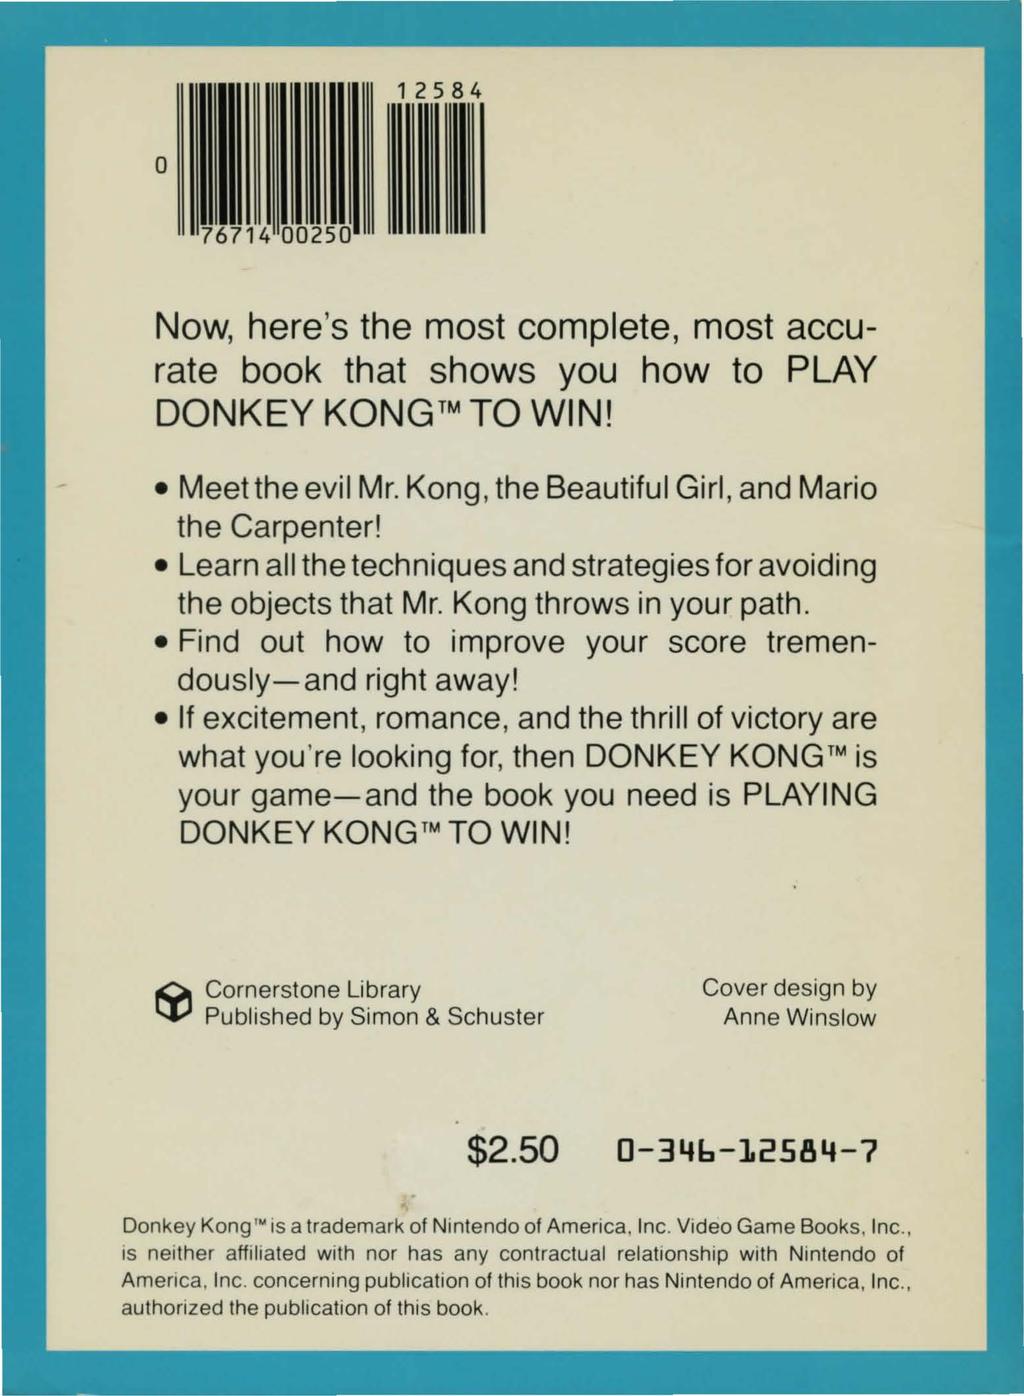 0 Now, here's the most complete, most accurate book that shows you how to PLAY DONKEY KONG TO WIN! Meetthe evil Mr. Kong, the Beautiful Girl, and Mario the Carpenter!